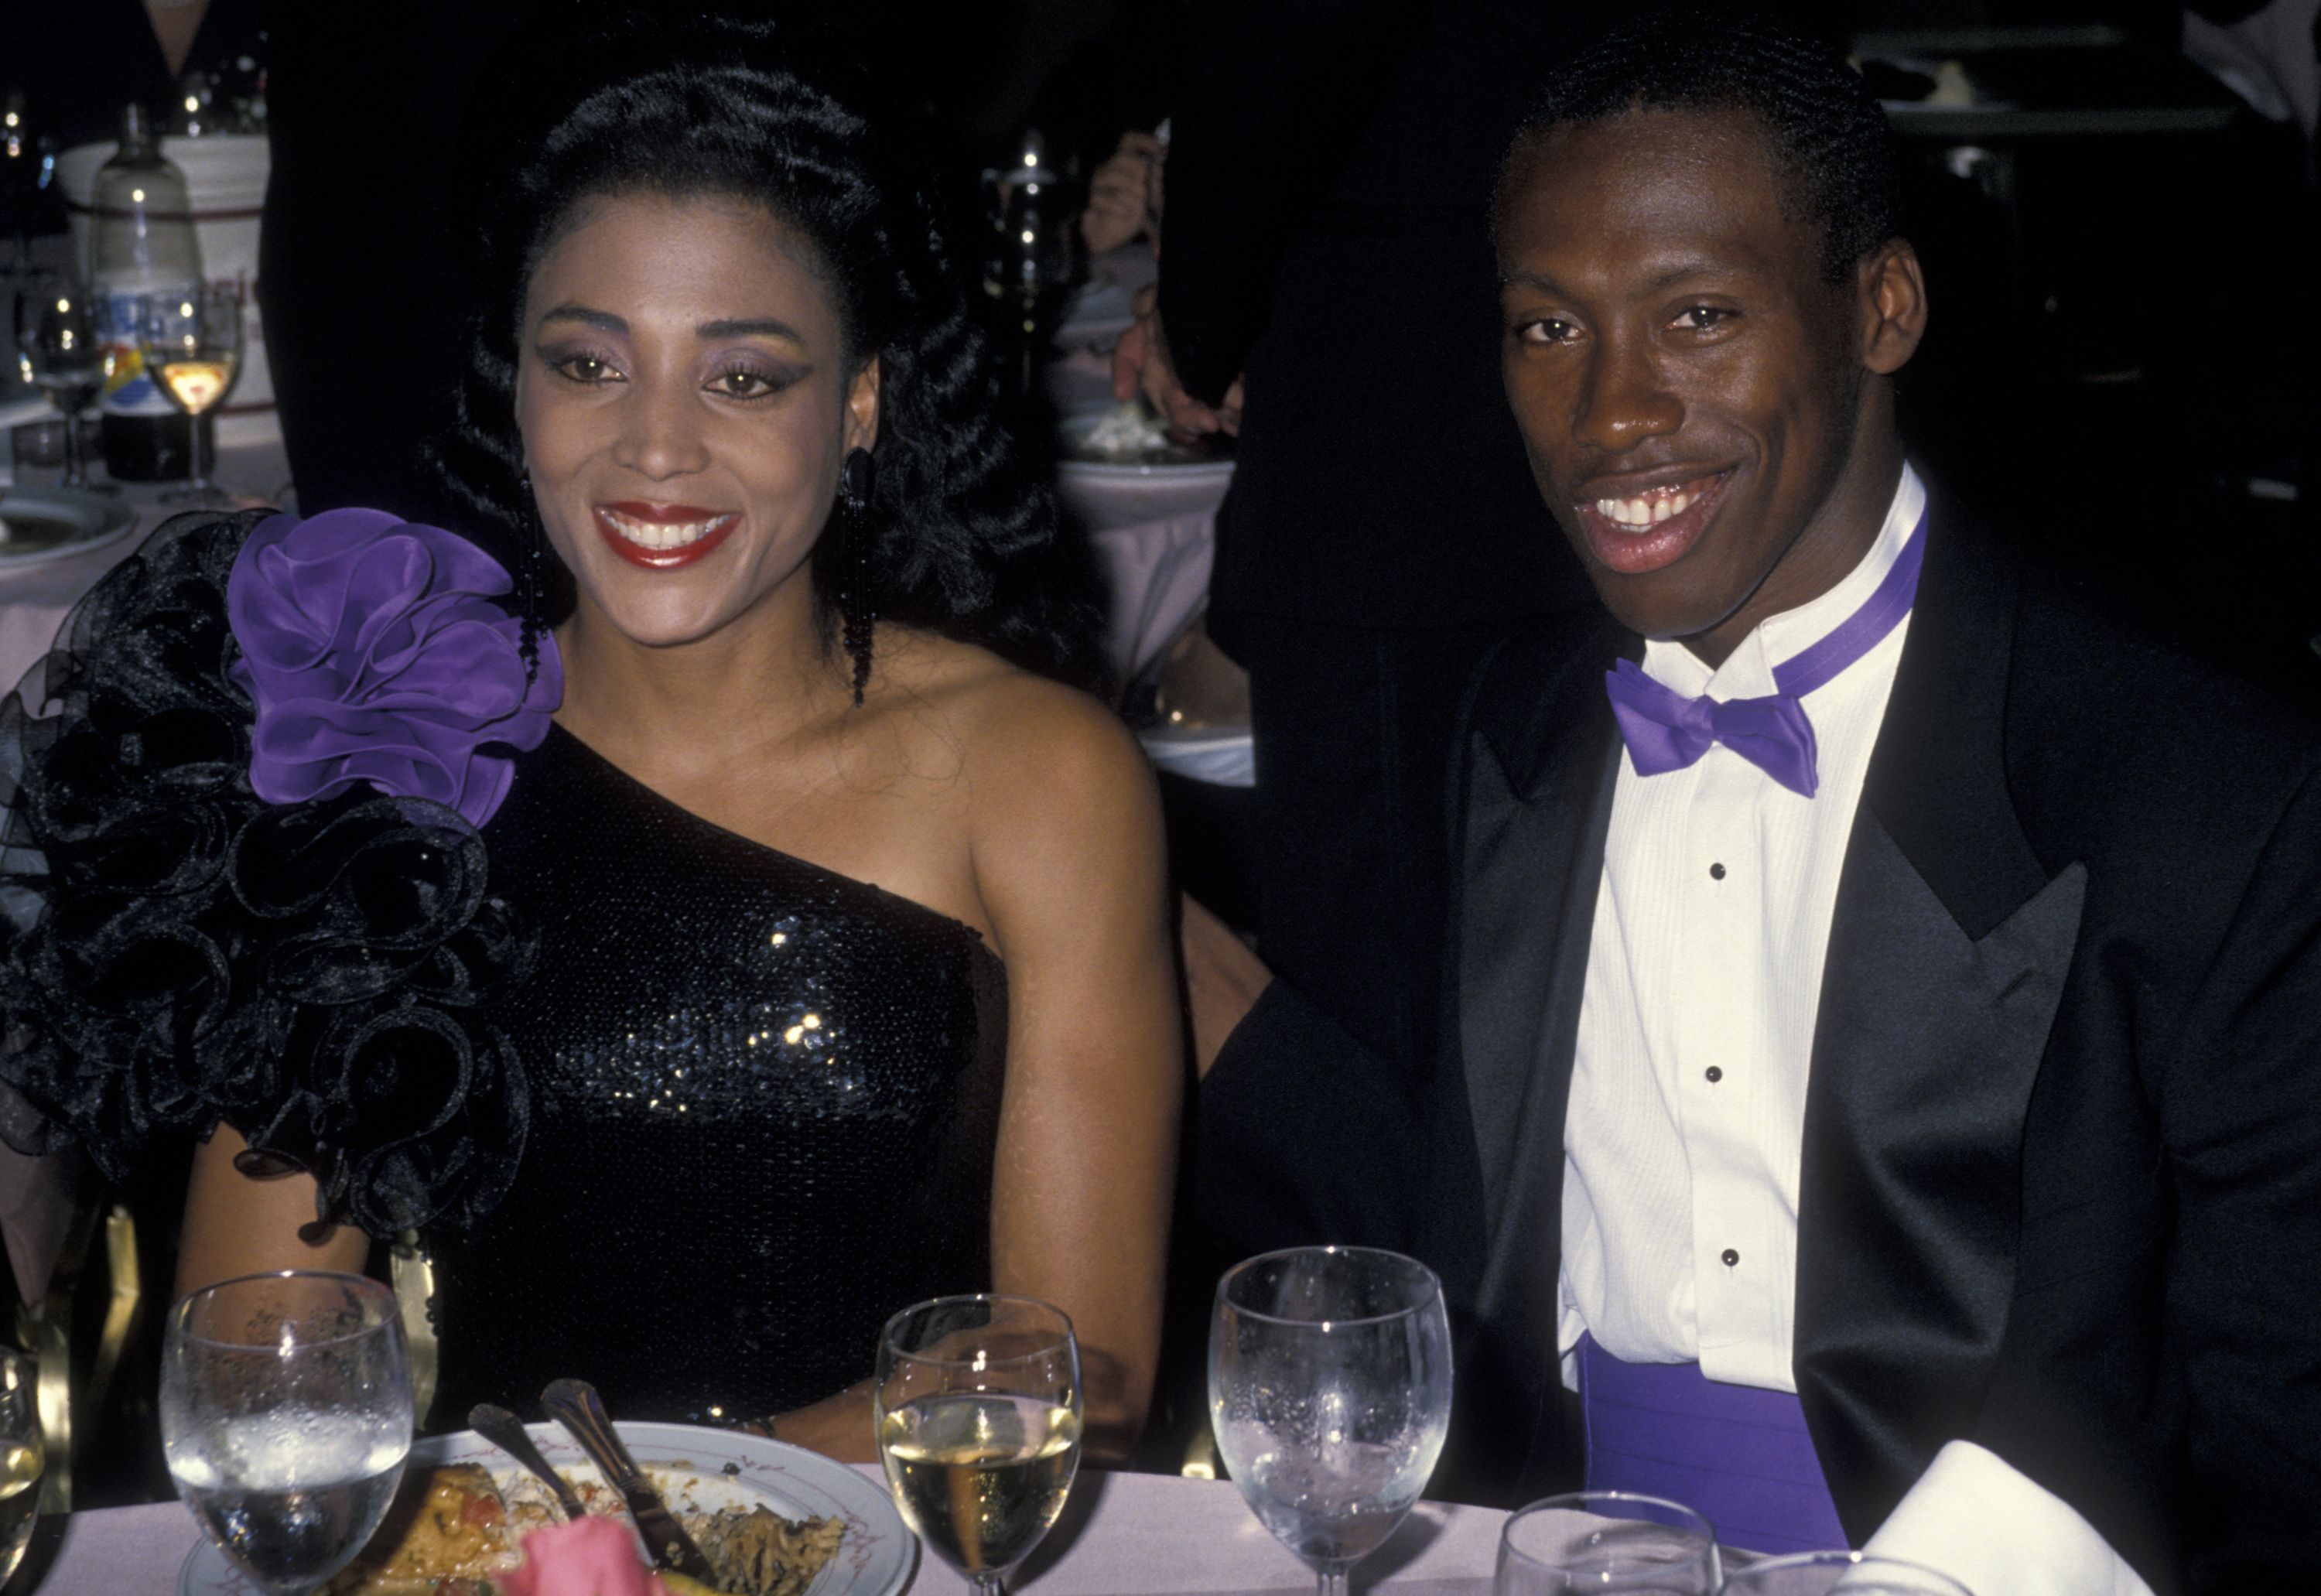 Athletes Florence Griffith-Joyner and Al Joyner at the Annual Woman's Sports Foundation Awards on October 17, 1988 in New York City.  | Photo: Getty Images